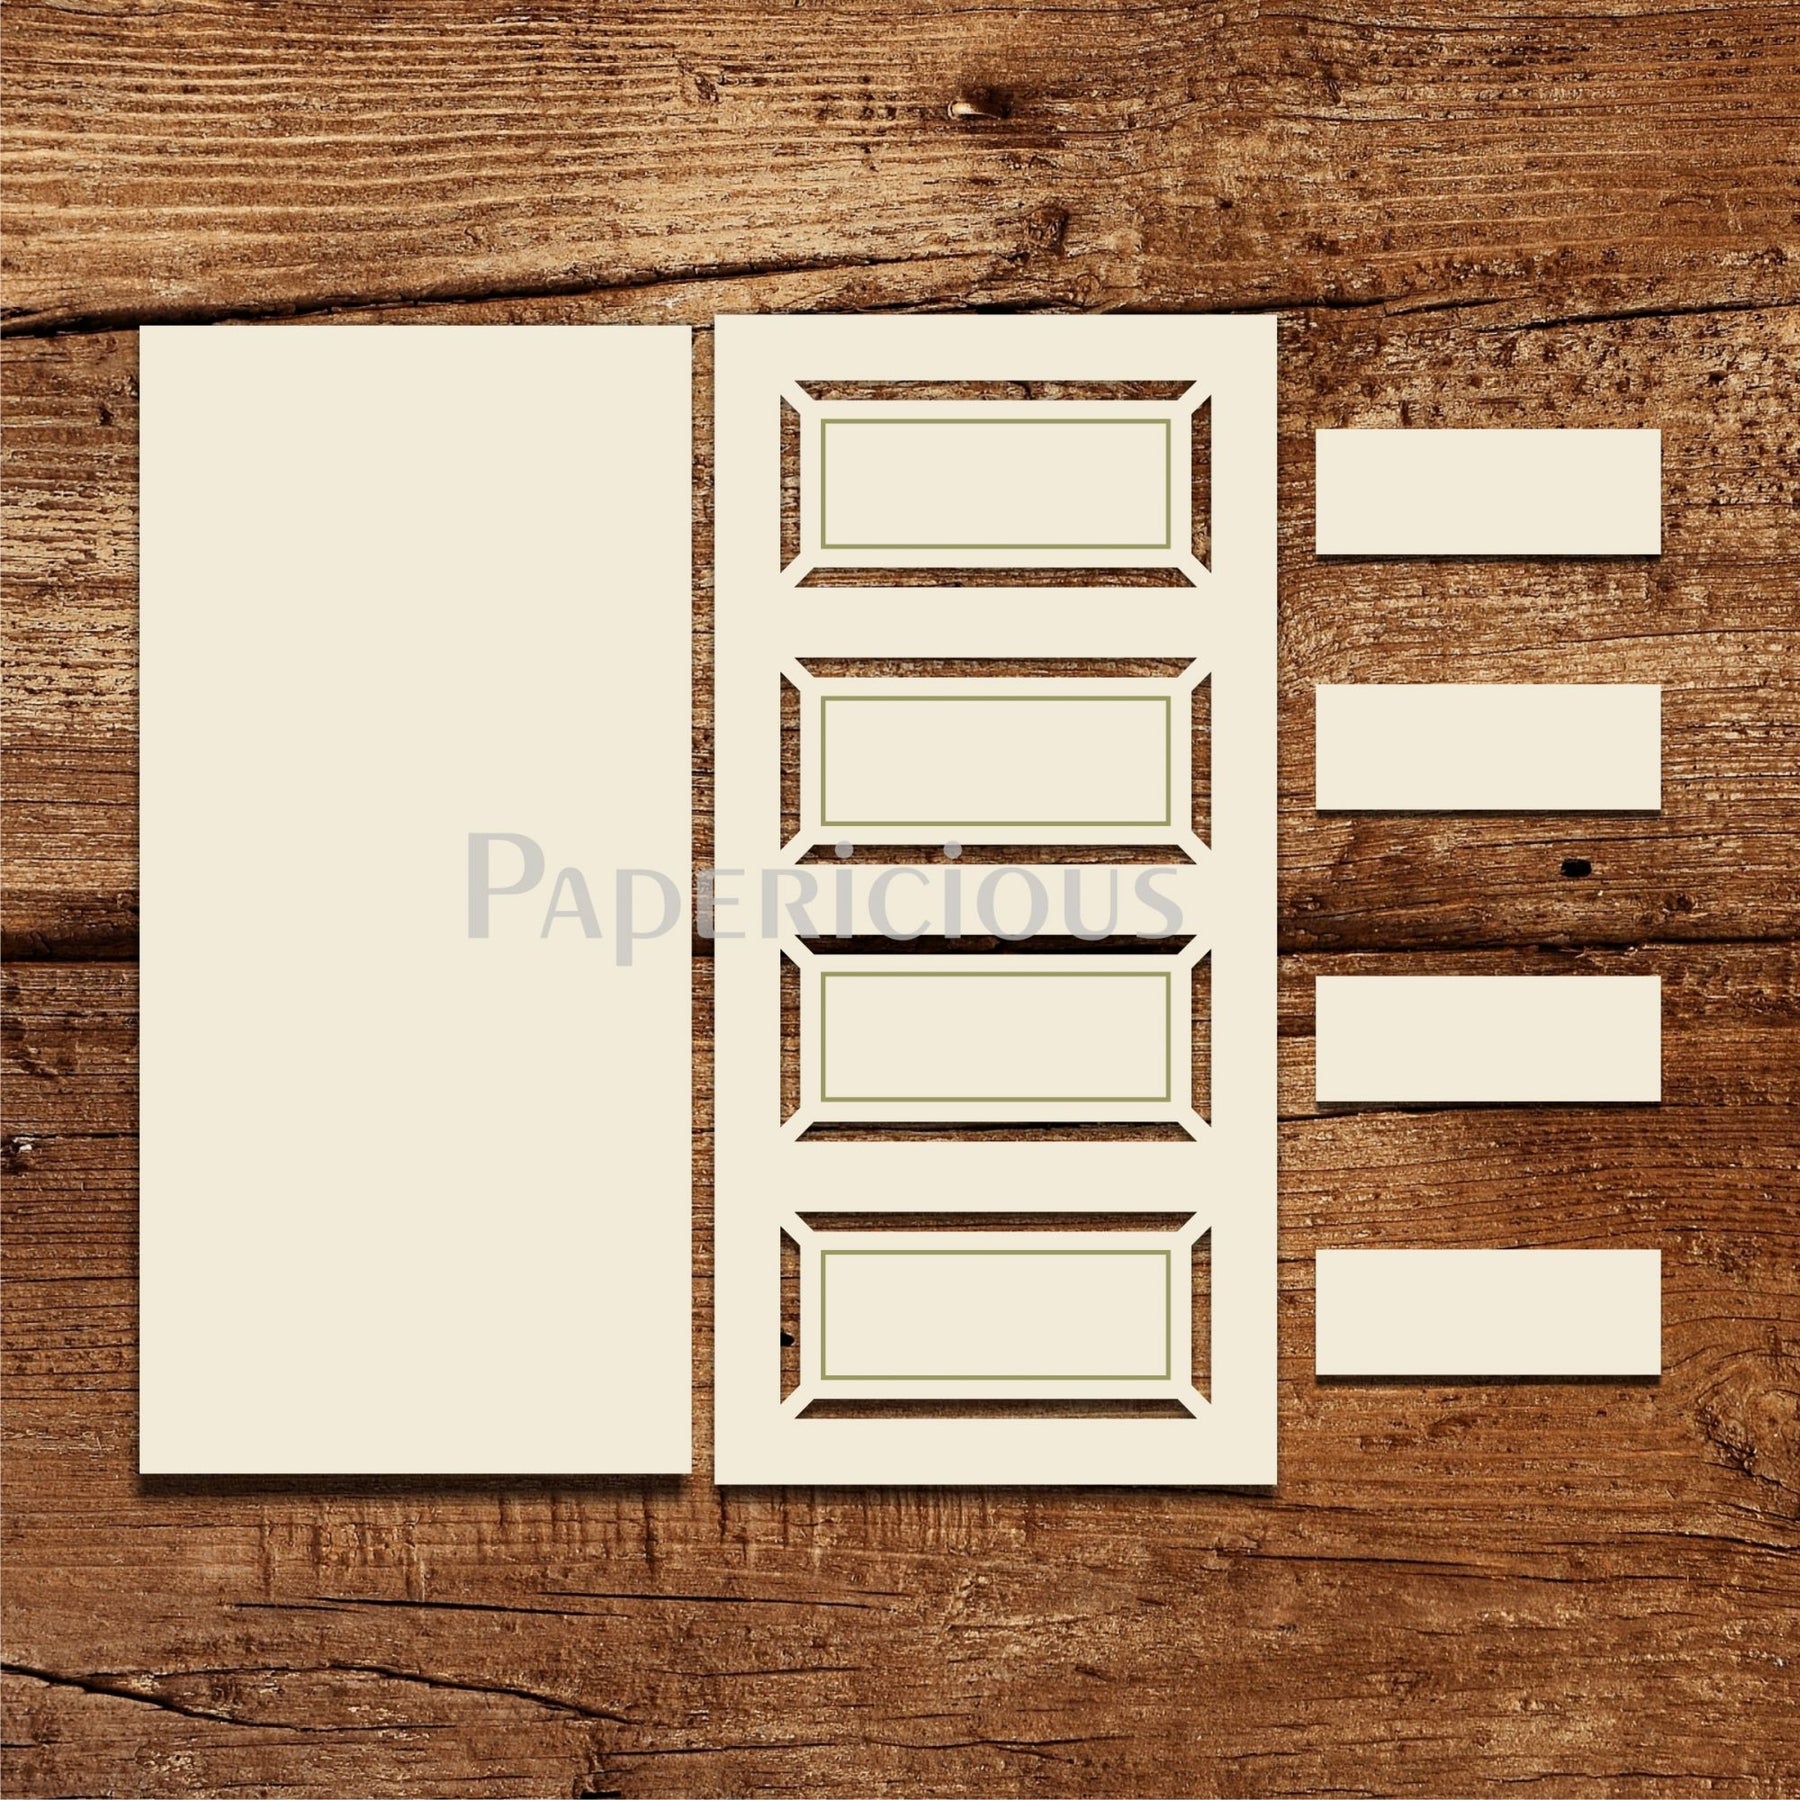 PAPERICIOUS Chippis Door Collection - 3 Layer Gate